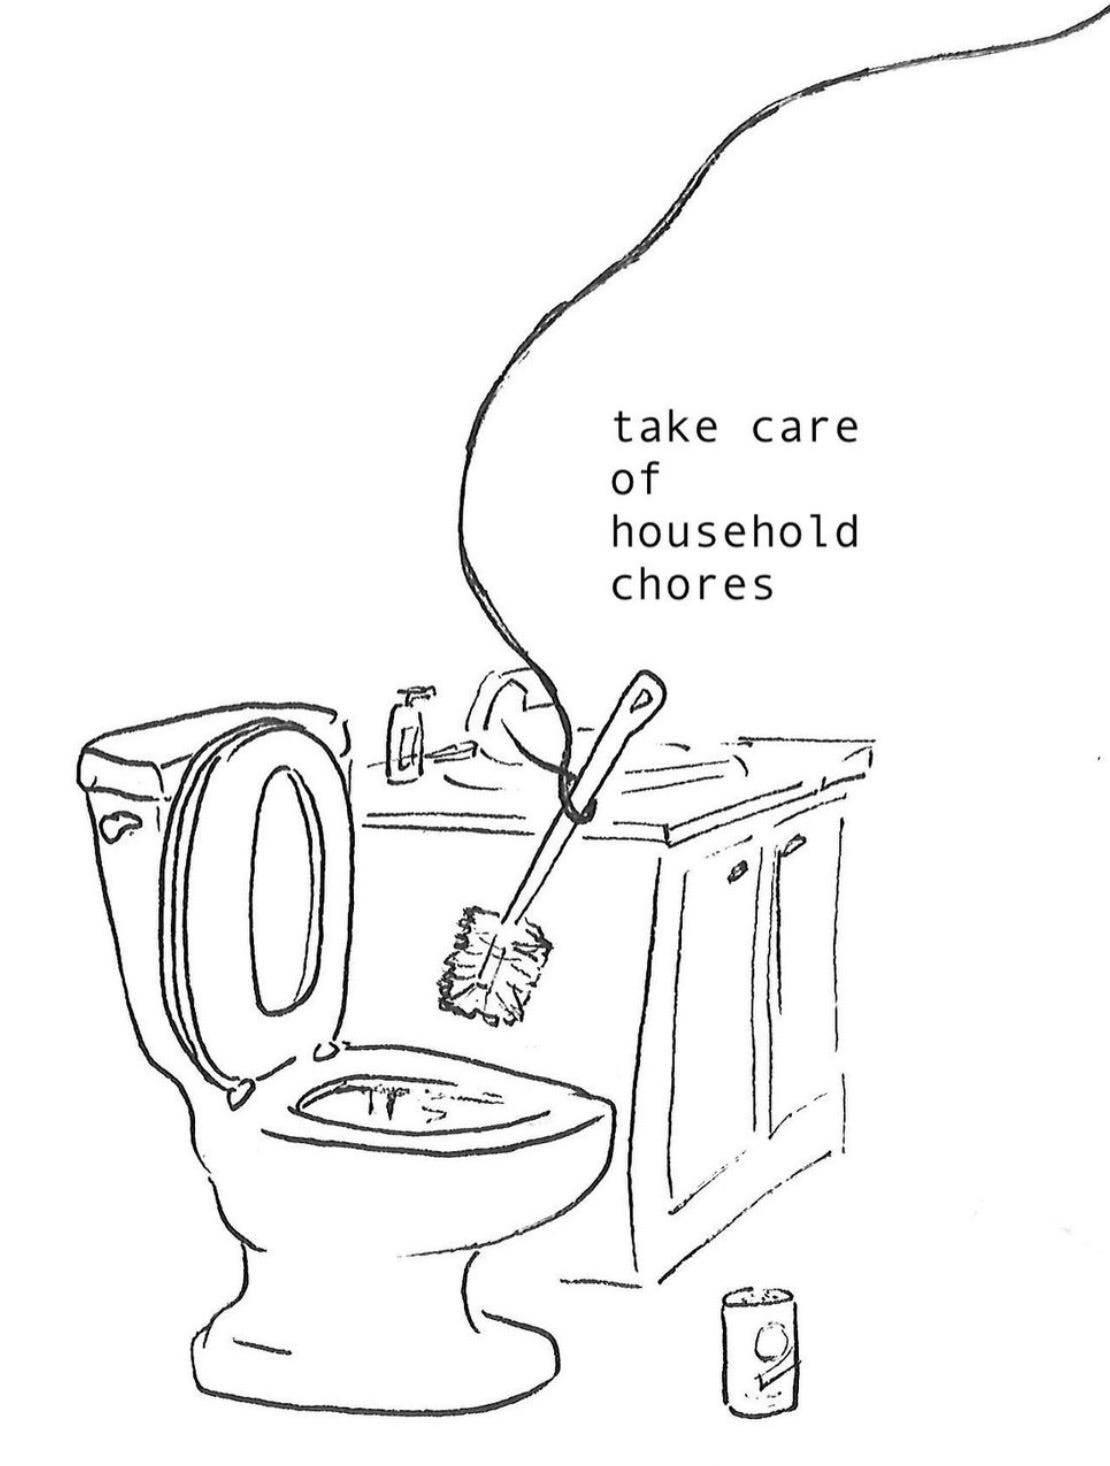 "take care of household chores"  the hair holds a toilet brush over the toilet, with a can of comet sitting next to it. A bathroom sink is in the background. 